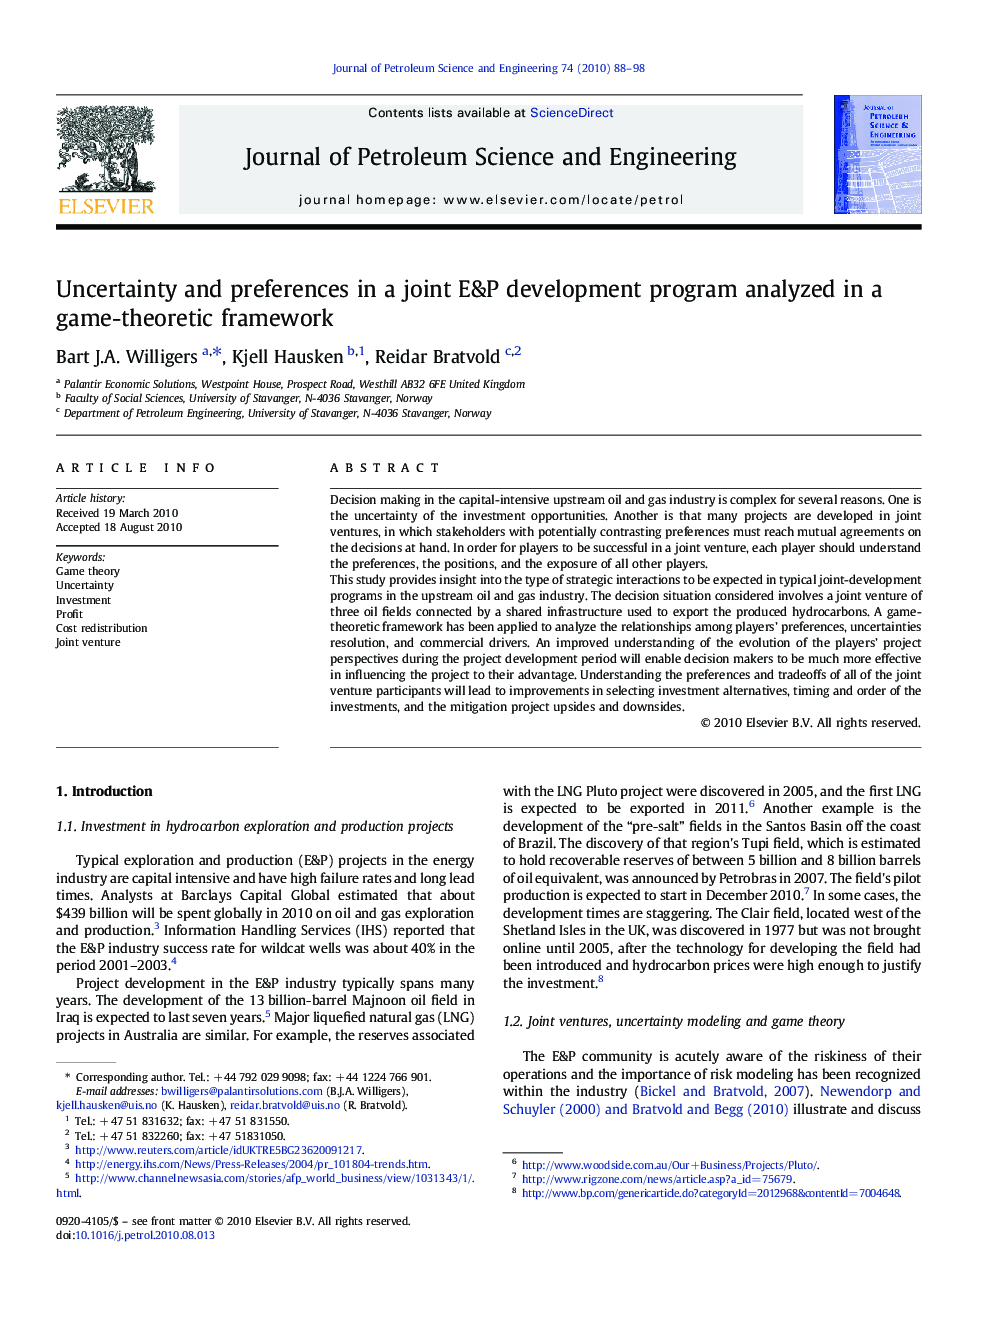 Uncertainty and preferences in a joint E&P development program analyzed in a game-theoretic framework